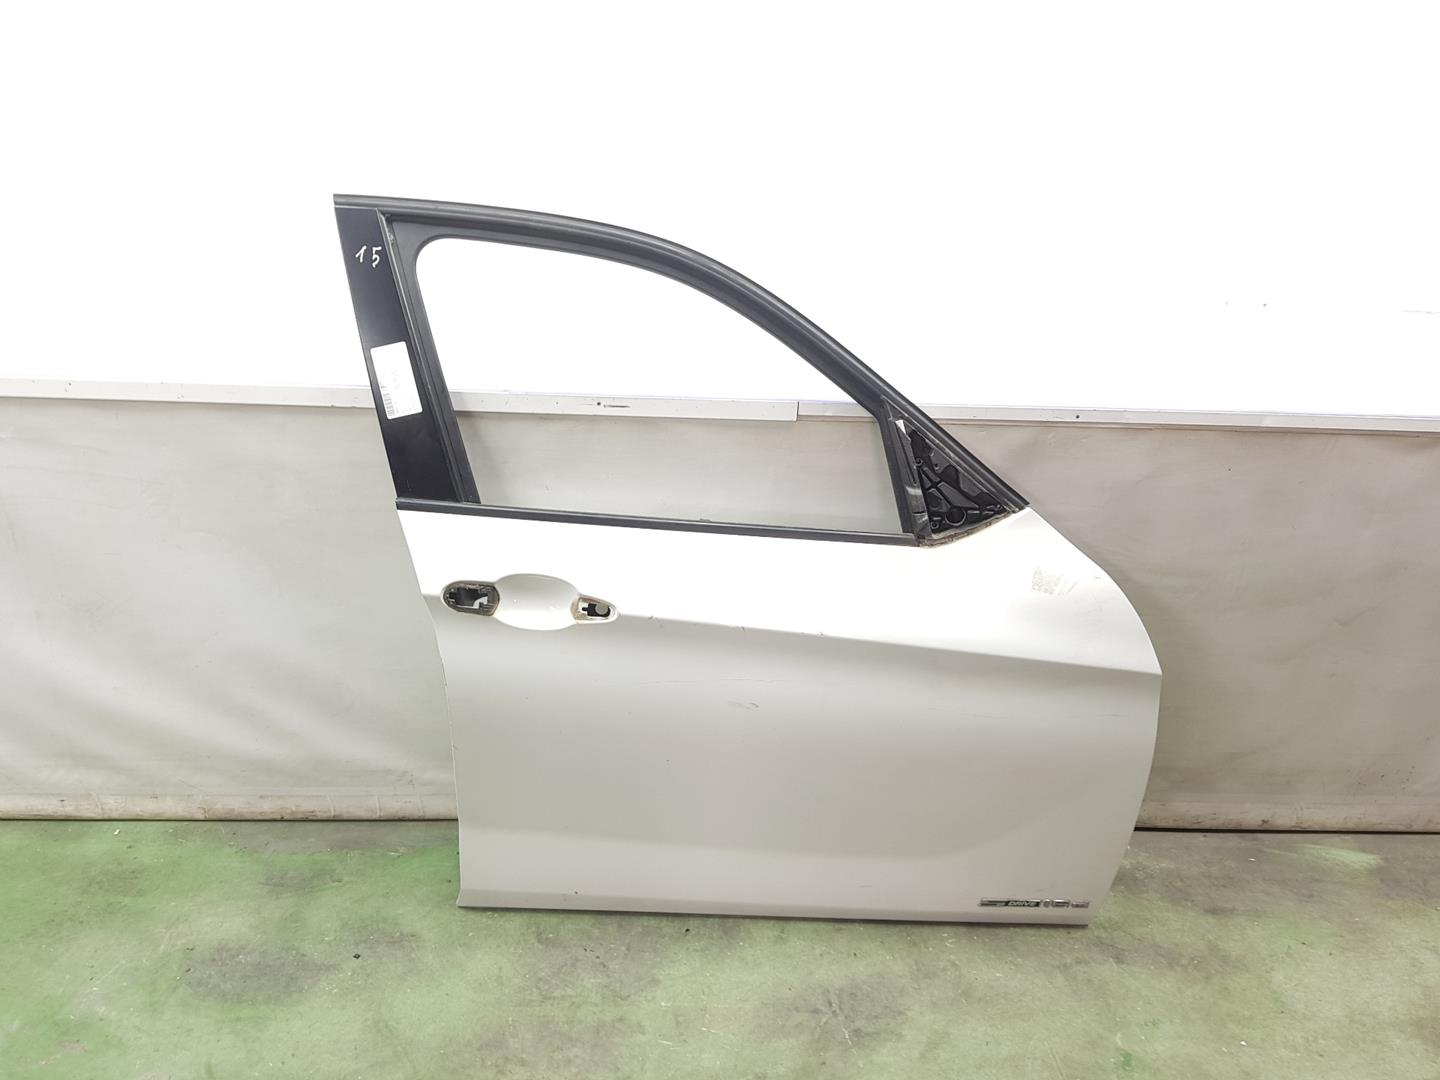 BMW X1 E84 (2009-2015) Front Right Door 41009628746, 41009628746, COLORBLANCO3002222DL 19813293